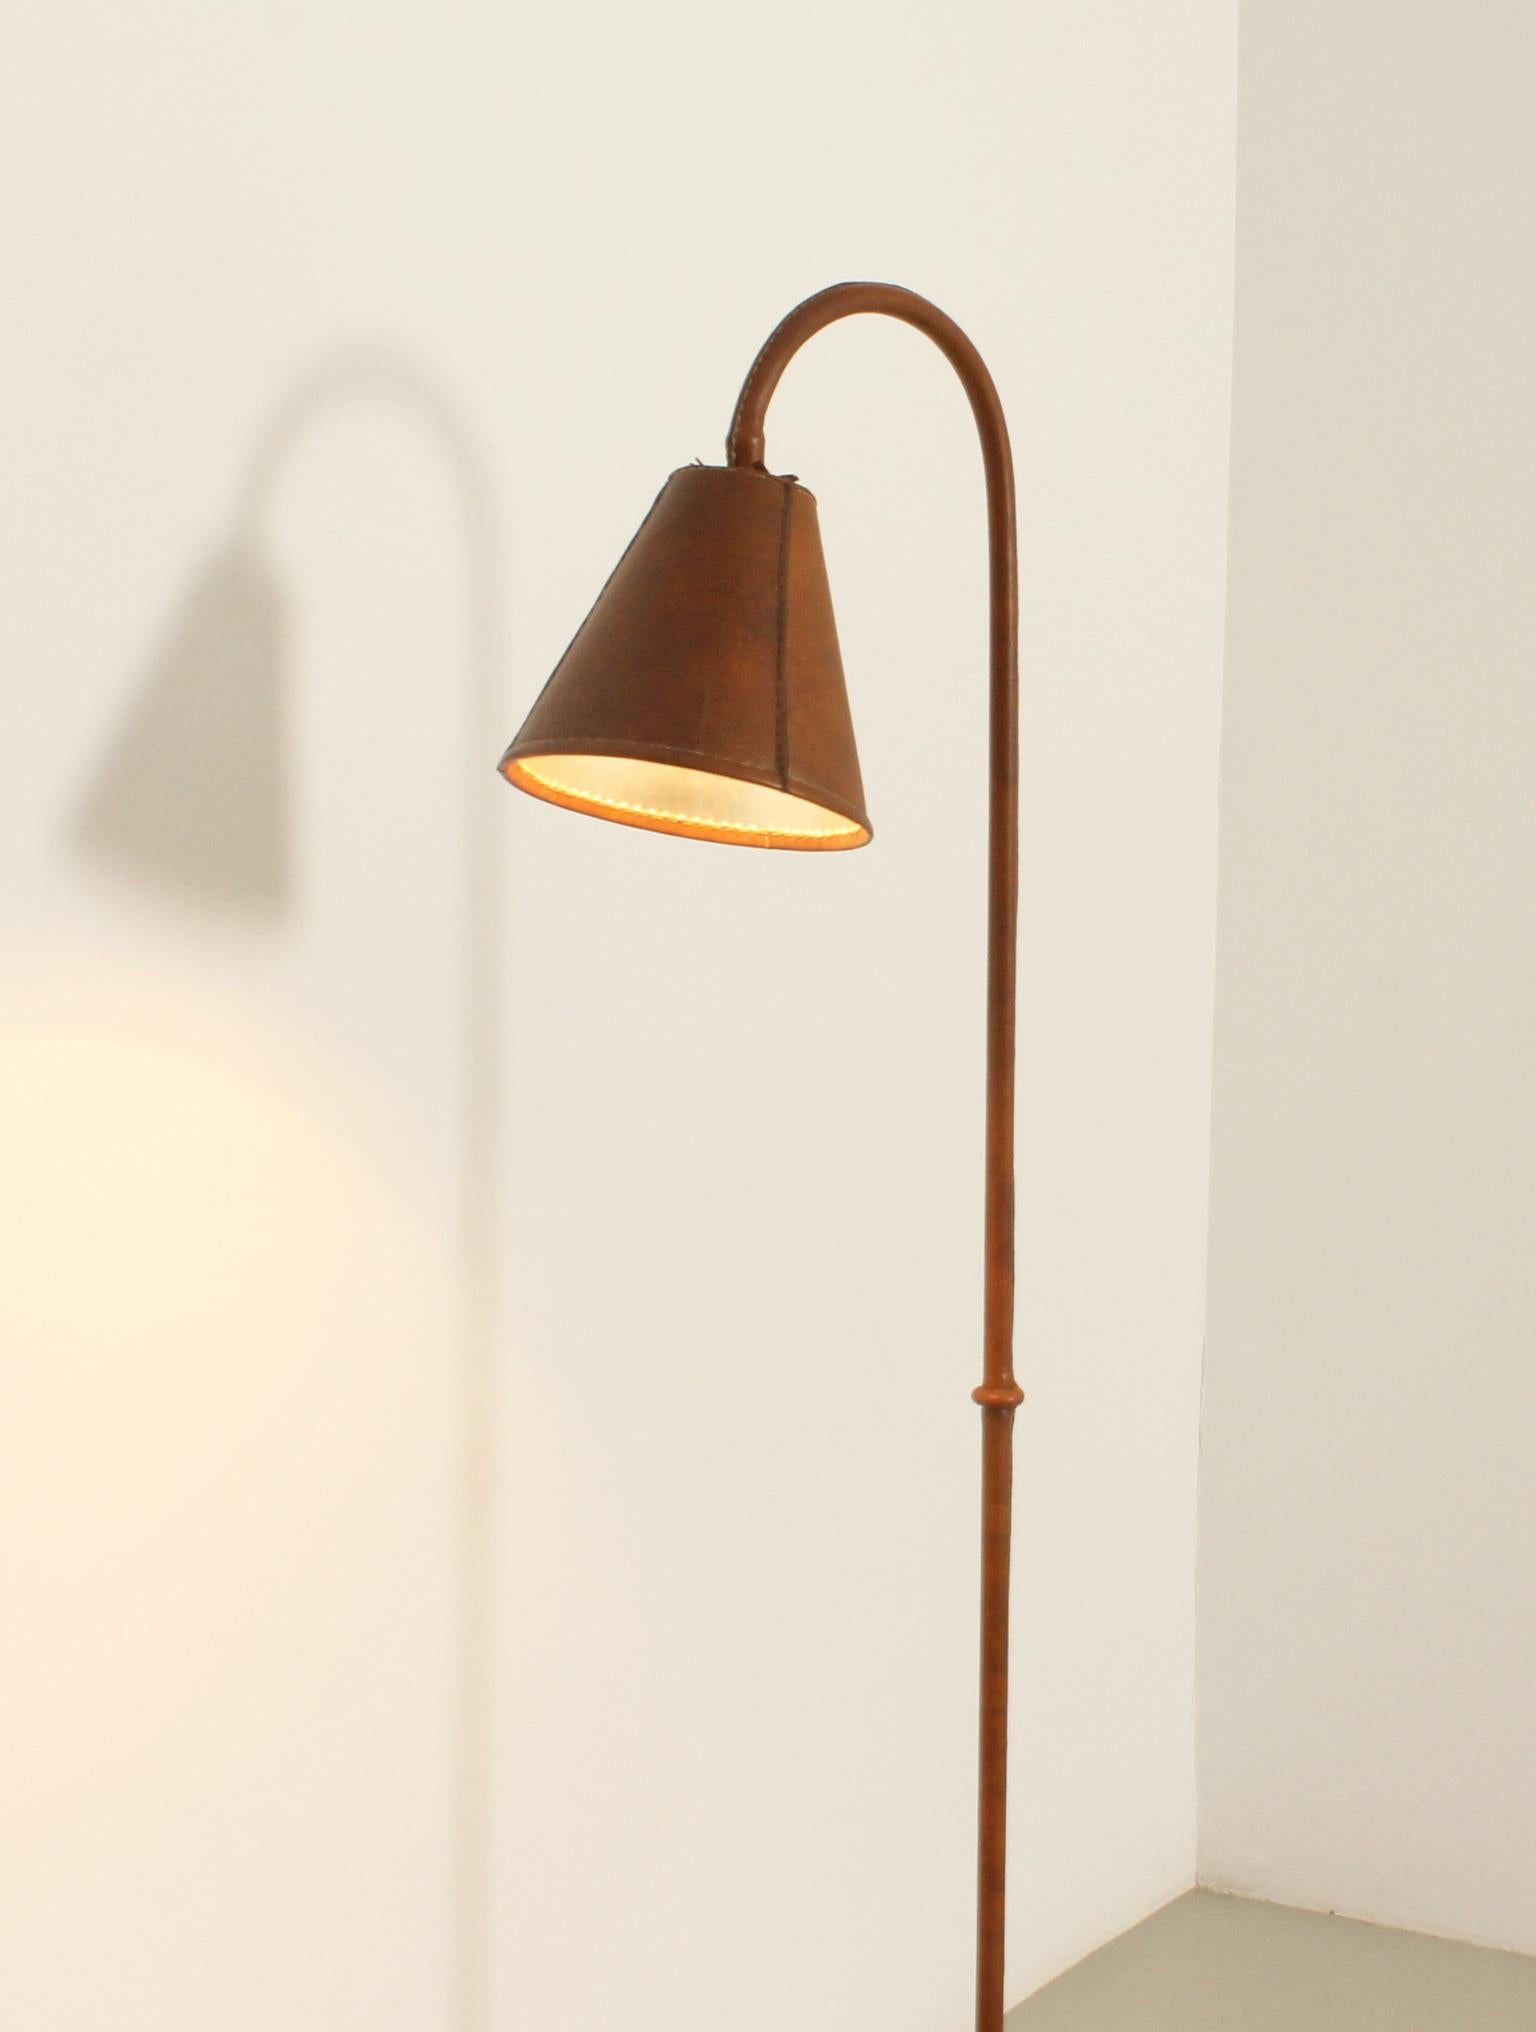 Floor Lamp by Valenti in Brown Leather, Spain, 1950's For Sale 4